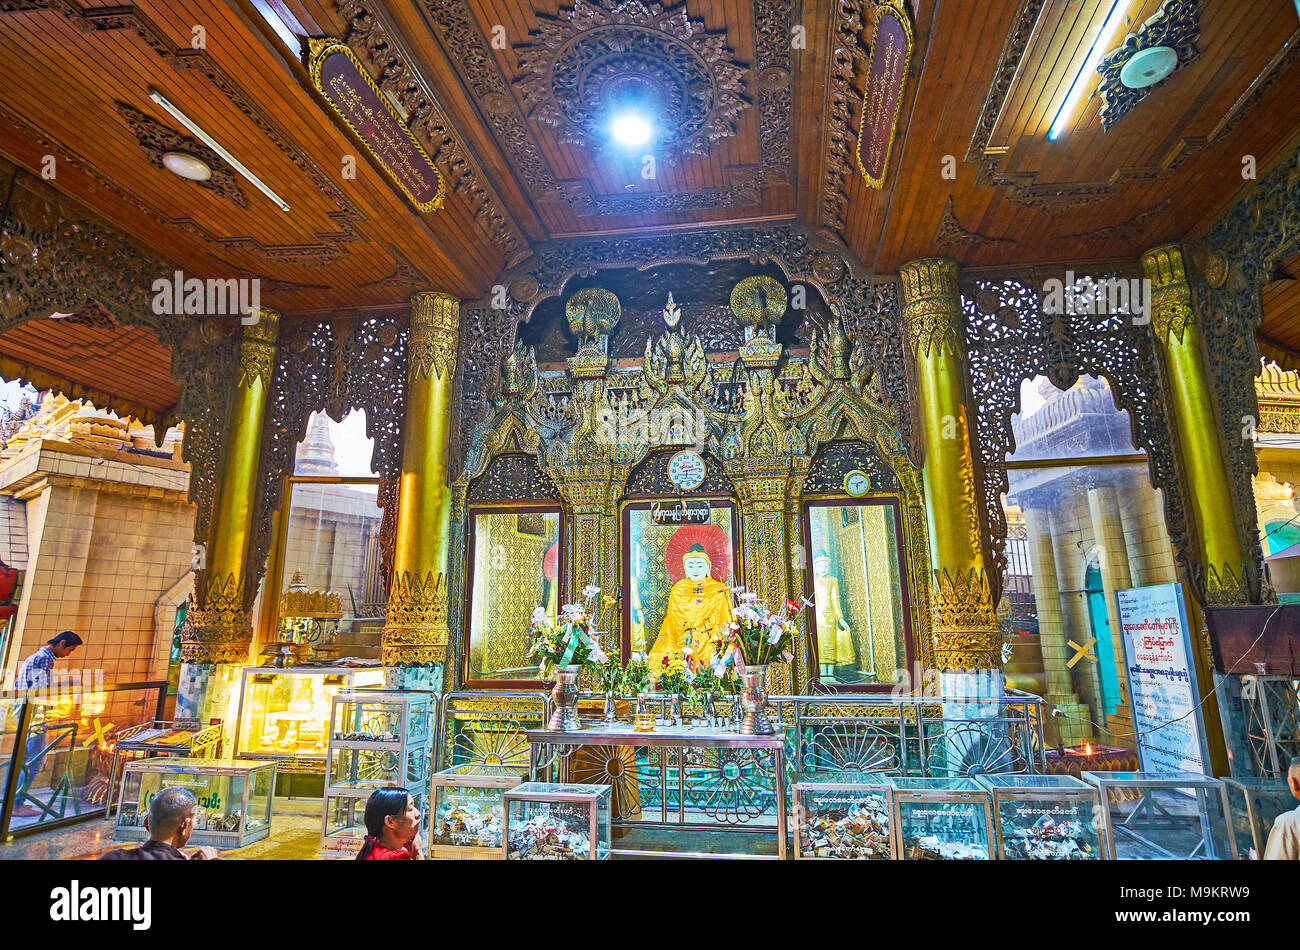 YANGON, MYANMAR - FEBRUARY 14, 2018: The complex decoration of interior of image house - the carved wooden patterns and huge golden columns around the Stock Photo